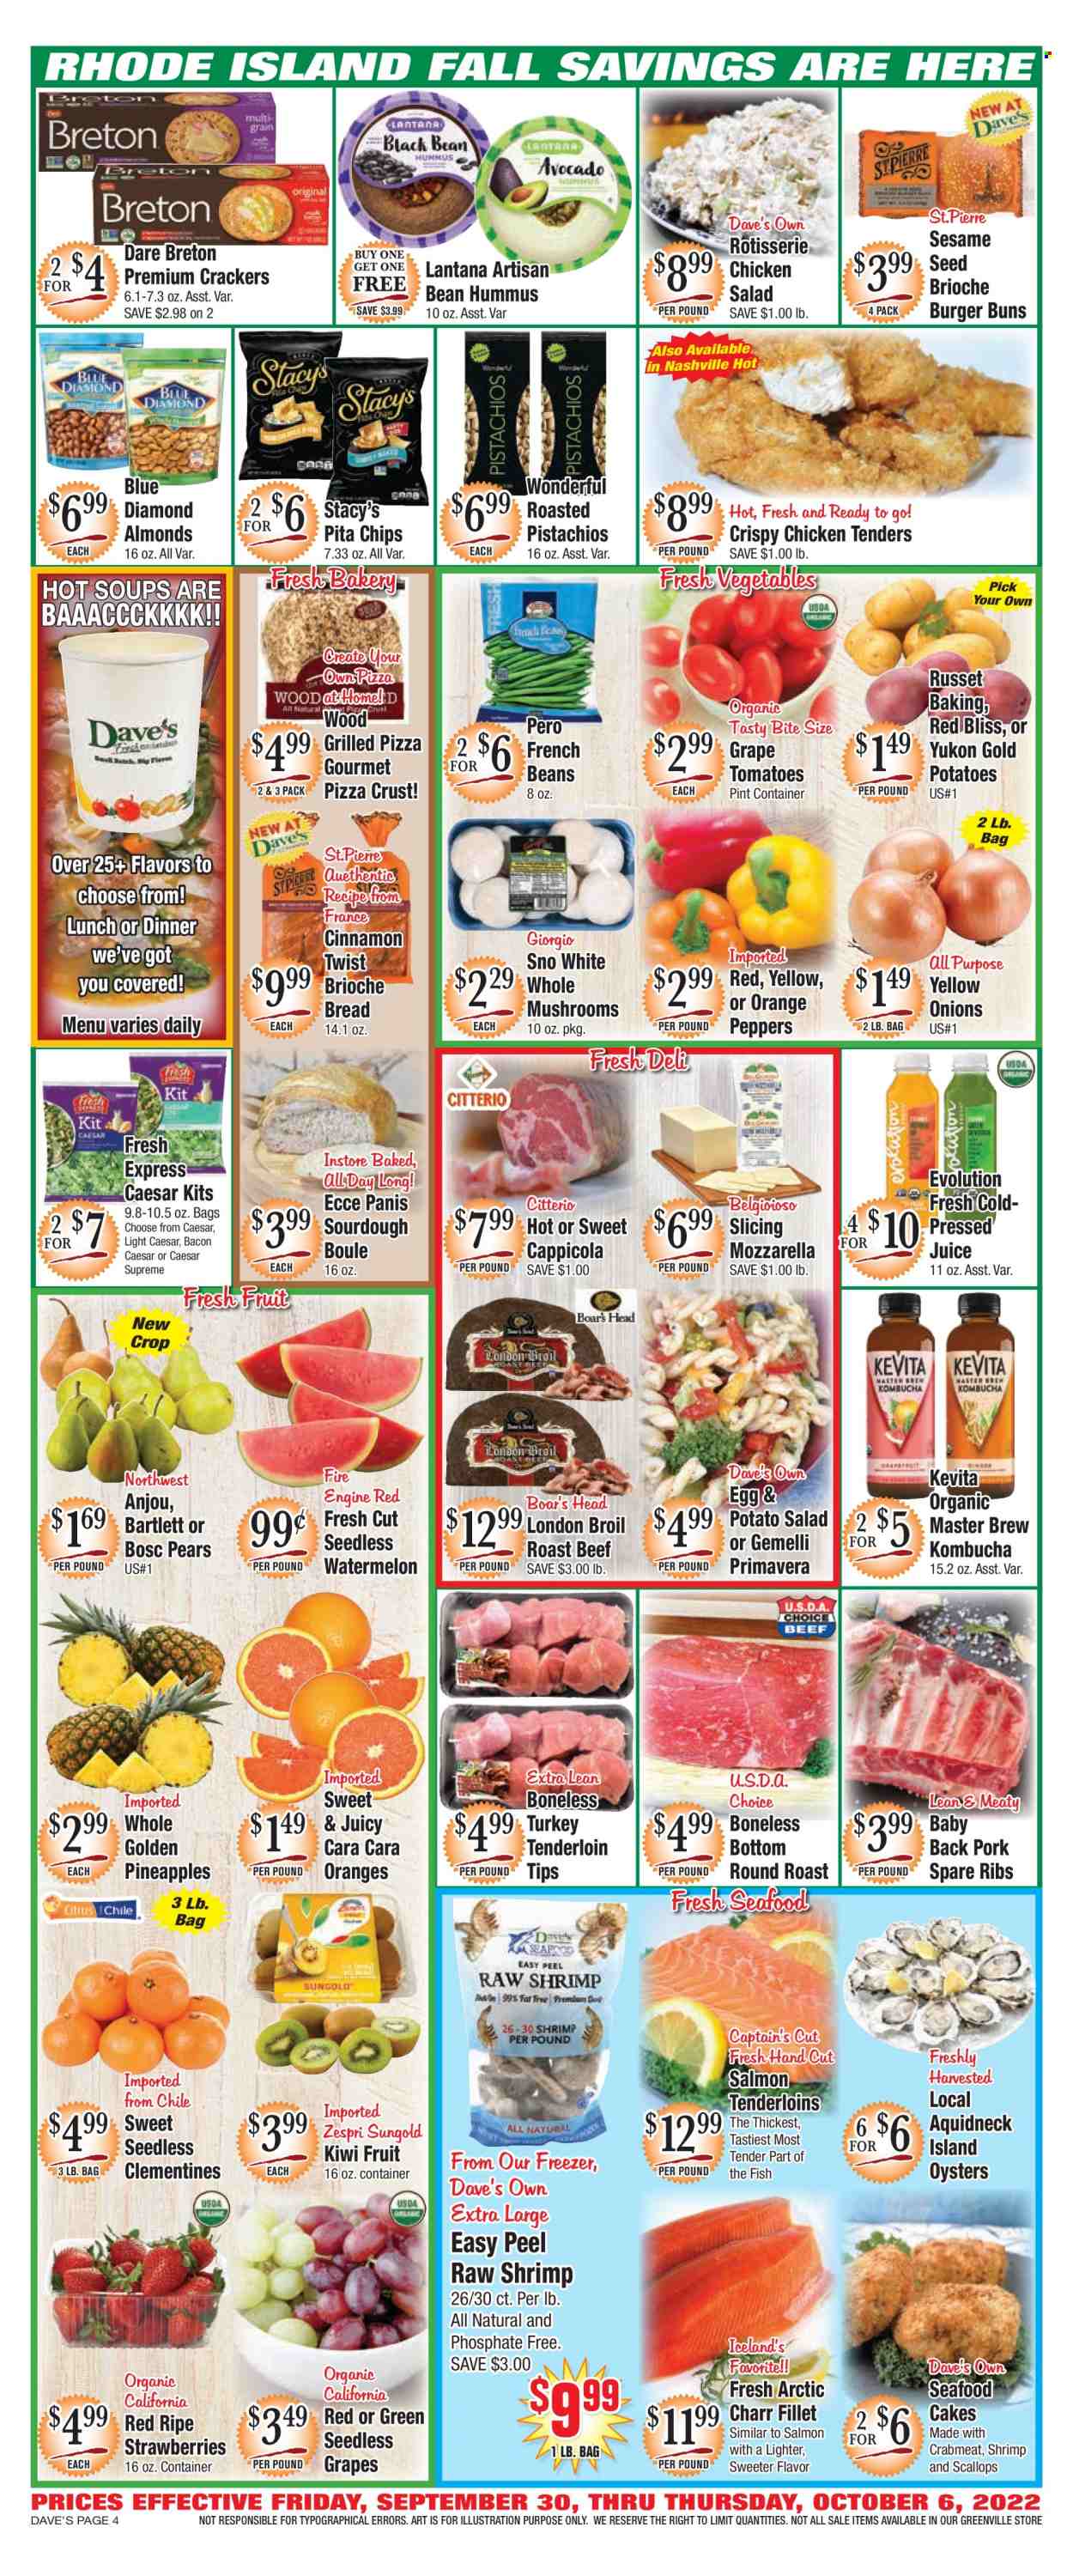 thumbnail - Dave's Fresh Marketplace Flyer - 09/30/2022 - 10/06/2022 - Sales products - bread, cake, buns, burger buns, brioche, beans, french beans, russet potatoes, potatoes, onion, kiwi, seedless grapes, strawberries, watermelon, pineapple, pears, oranges, crab meat, salmon, scallops, oysters, seafood, fish, shrimps, pizza, chicken roast, chicken tenders, hummus, potato salad, chicken salad, eggs, crackers, chips, pita chips, sesame seed, cinnamon, almonds, pistachios, Blue Diamond, juice, kombucha, KeVita, turkey tenderloin, beef meat, round roast, roast beef, pork meat, pork ribs, pork spare ribs, pork back ribs, clementines. Page 4.